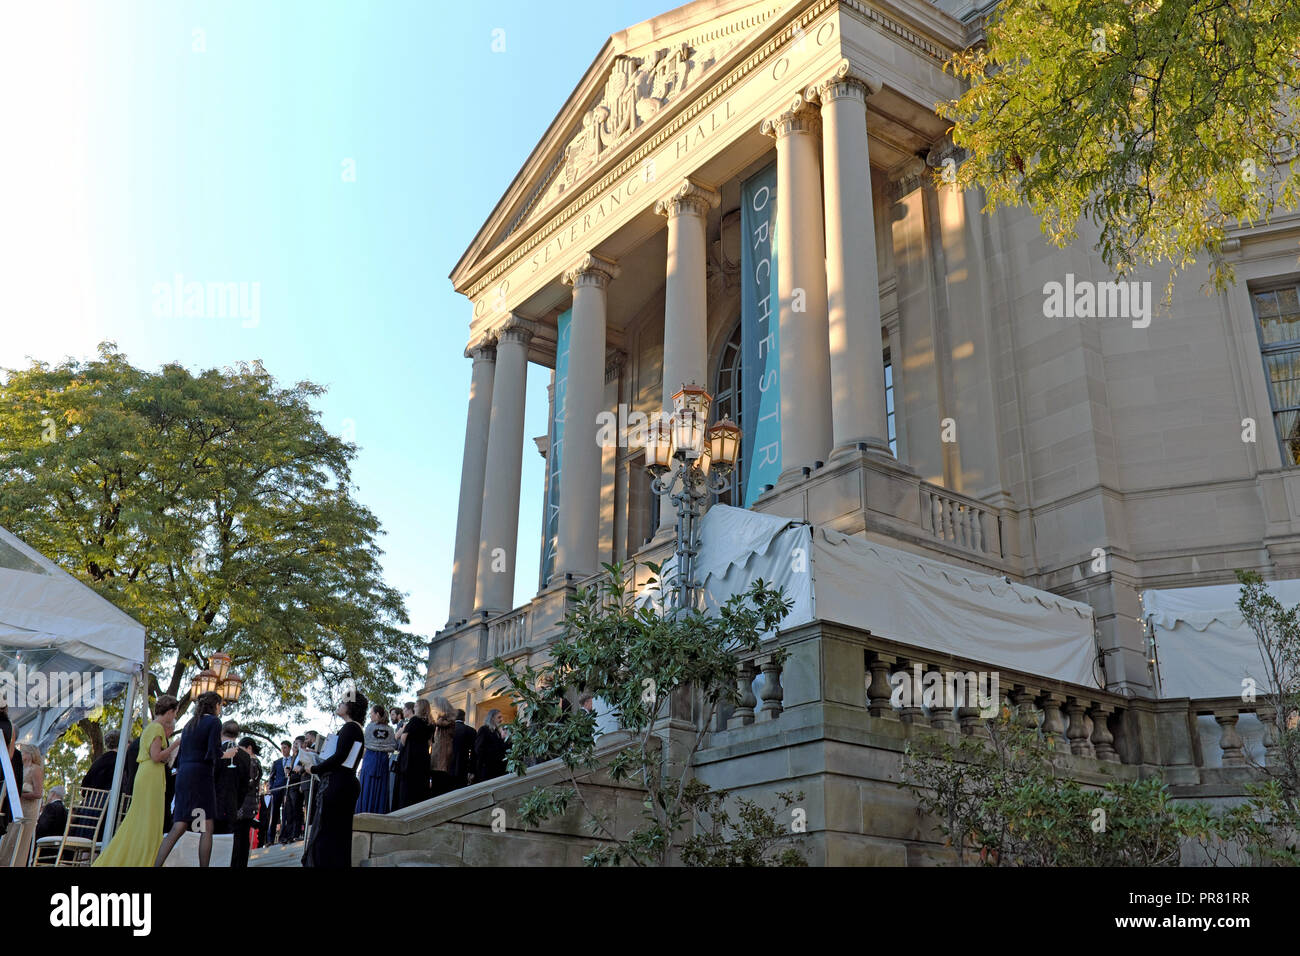 Cleveland, Ohio, USA. 29th Sept, 2018. Patrons socialize prior to attending the Cleveland Orchestra 100th Anniversary gala.  Severance Hall, home of the Cleveland Orchestra, hosted many benefactors and patrons on its front terrace prior to the performance.  Credit: Mark Kanning/Alamy Live News. Stock Photo